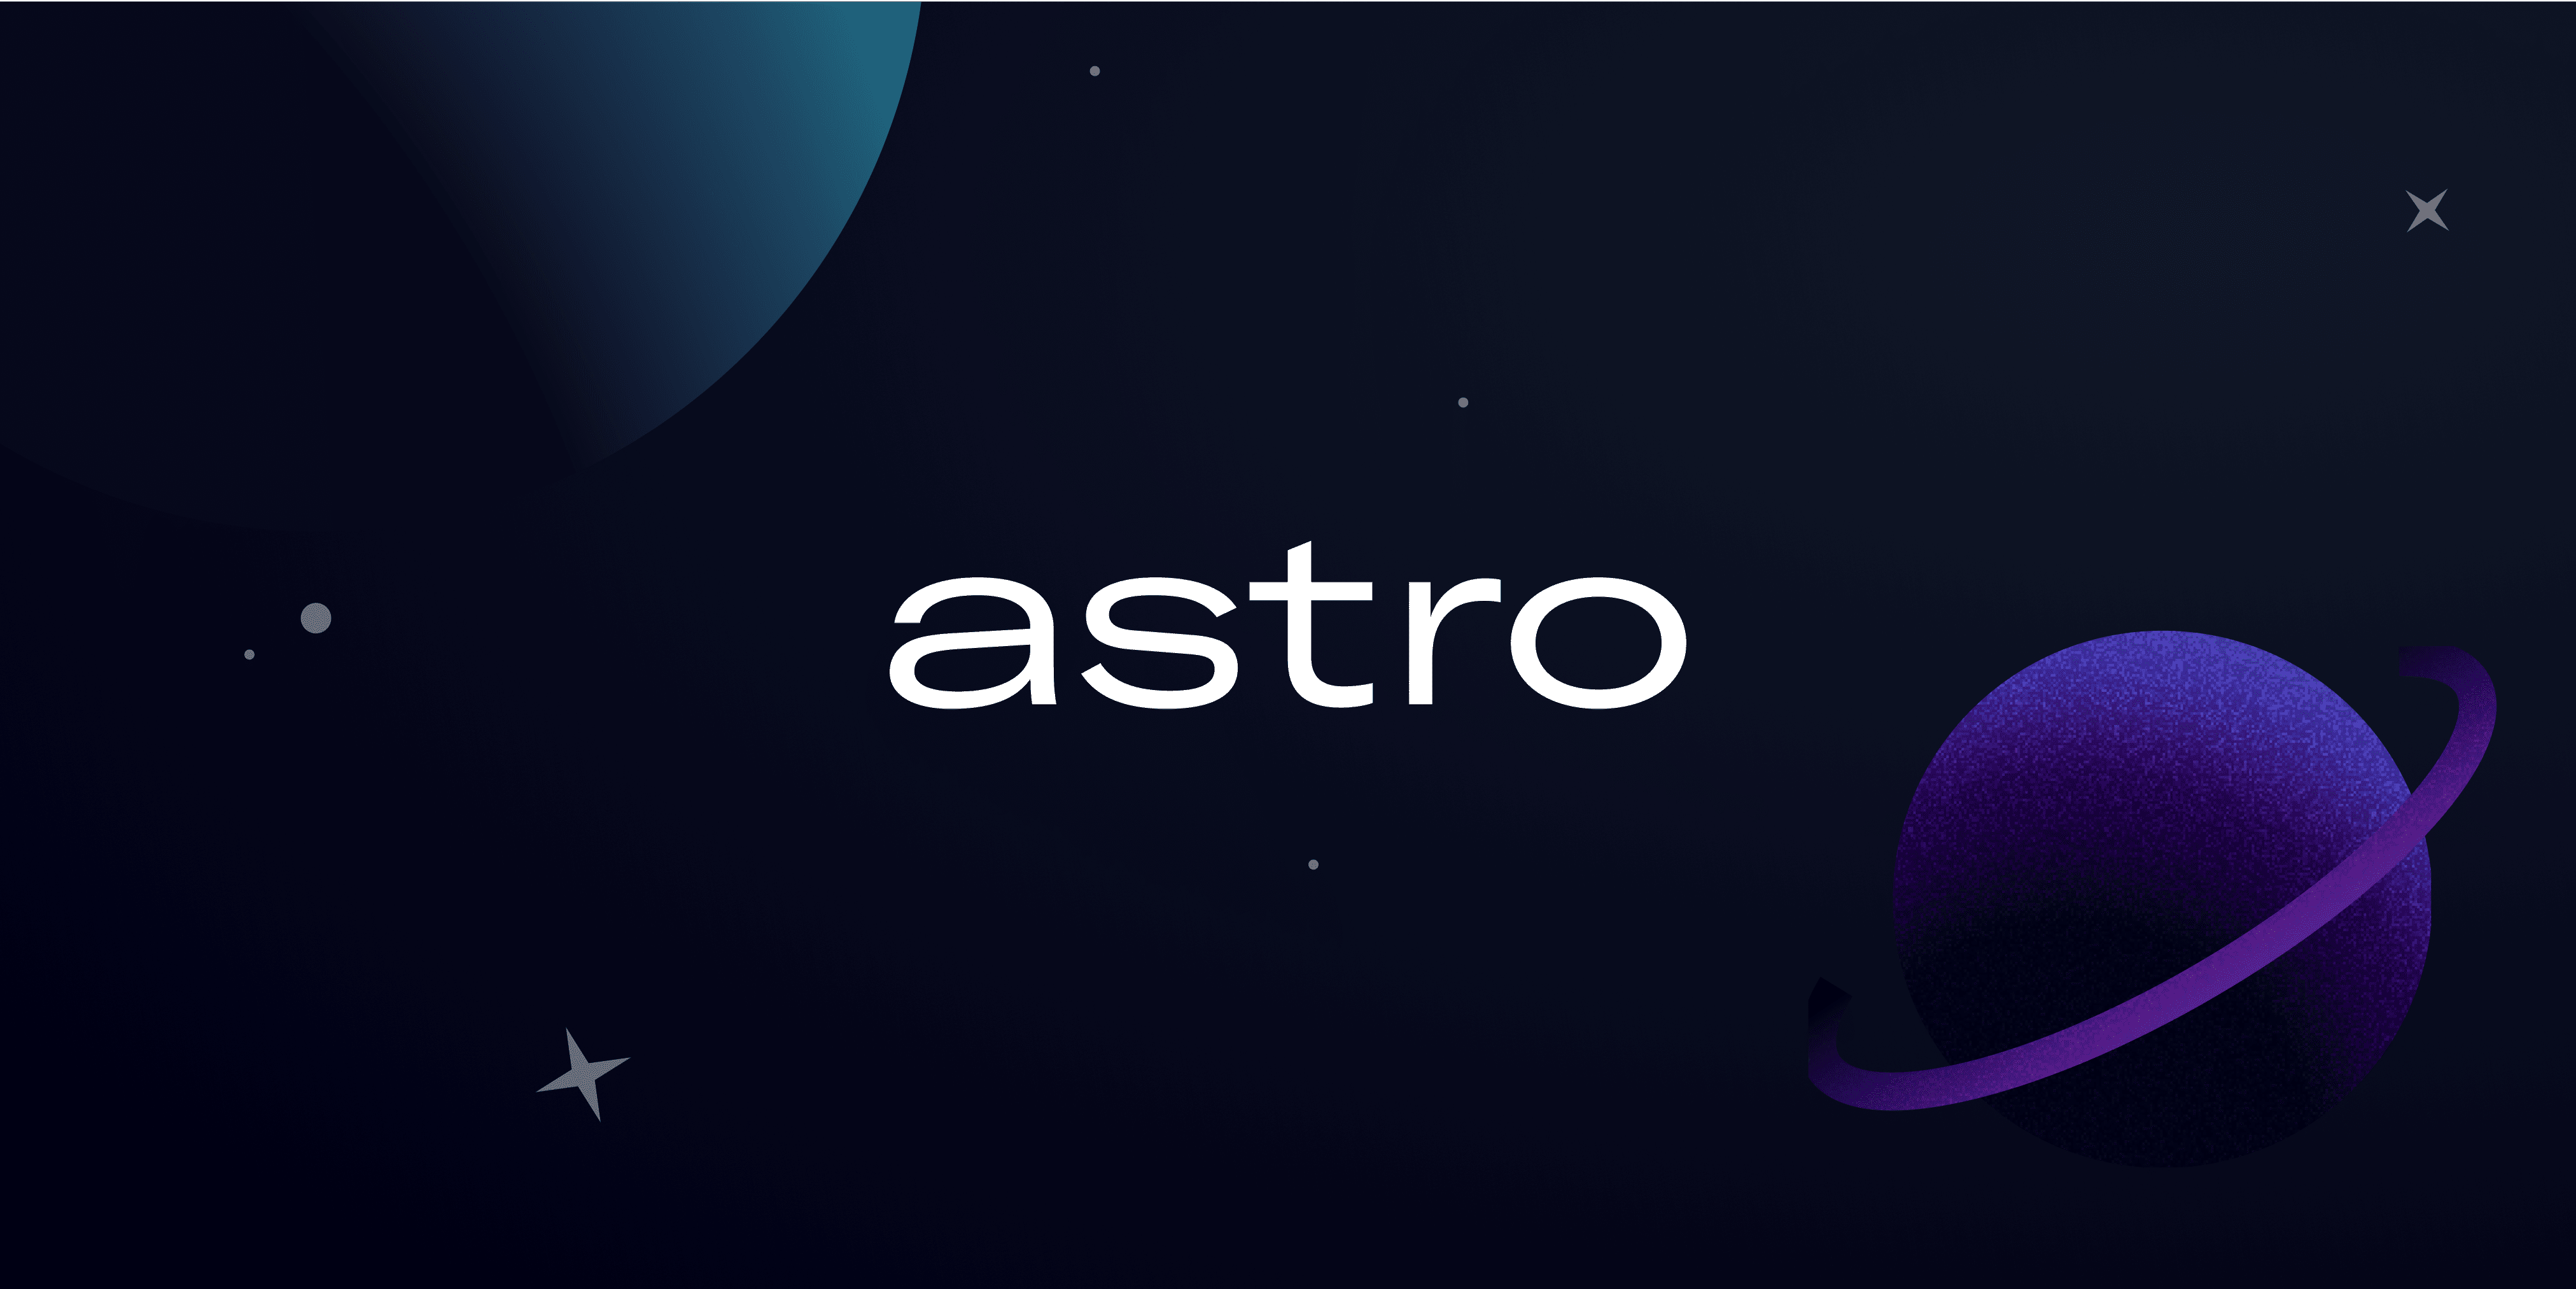 The word “astro” against an illustration of planets and stars.